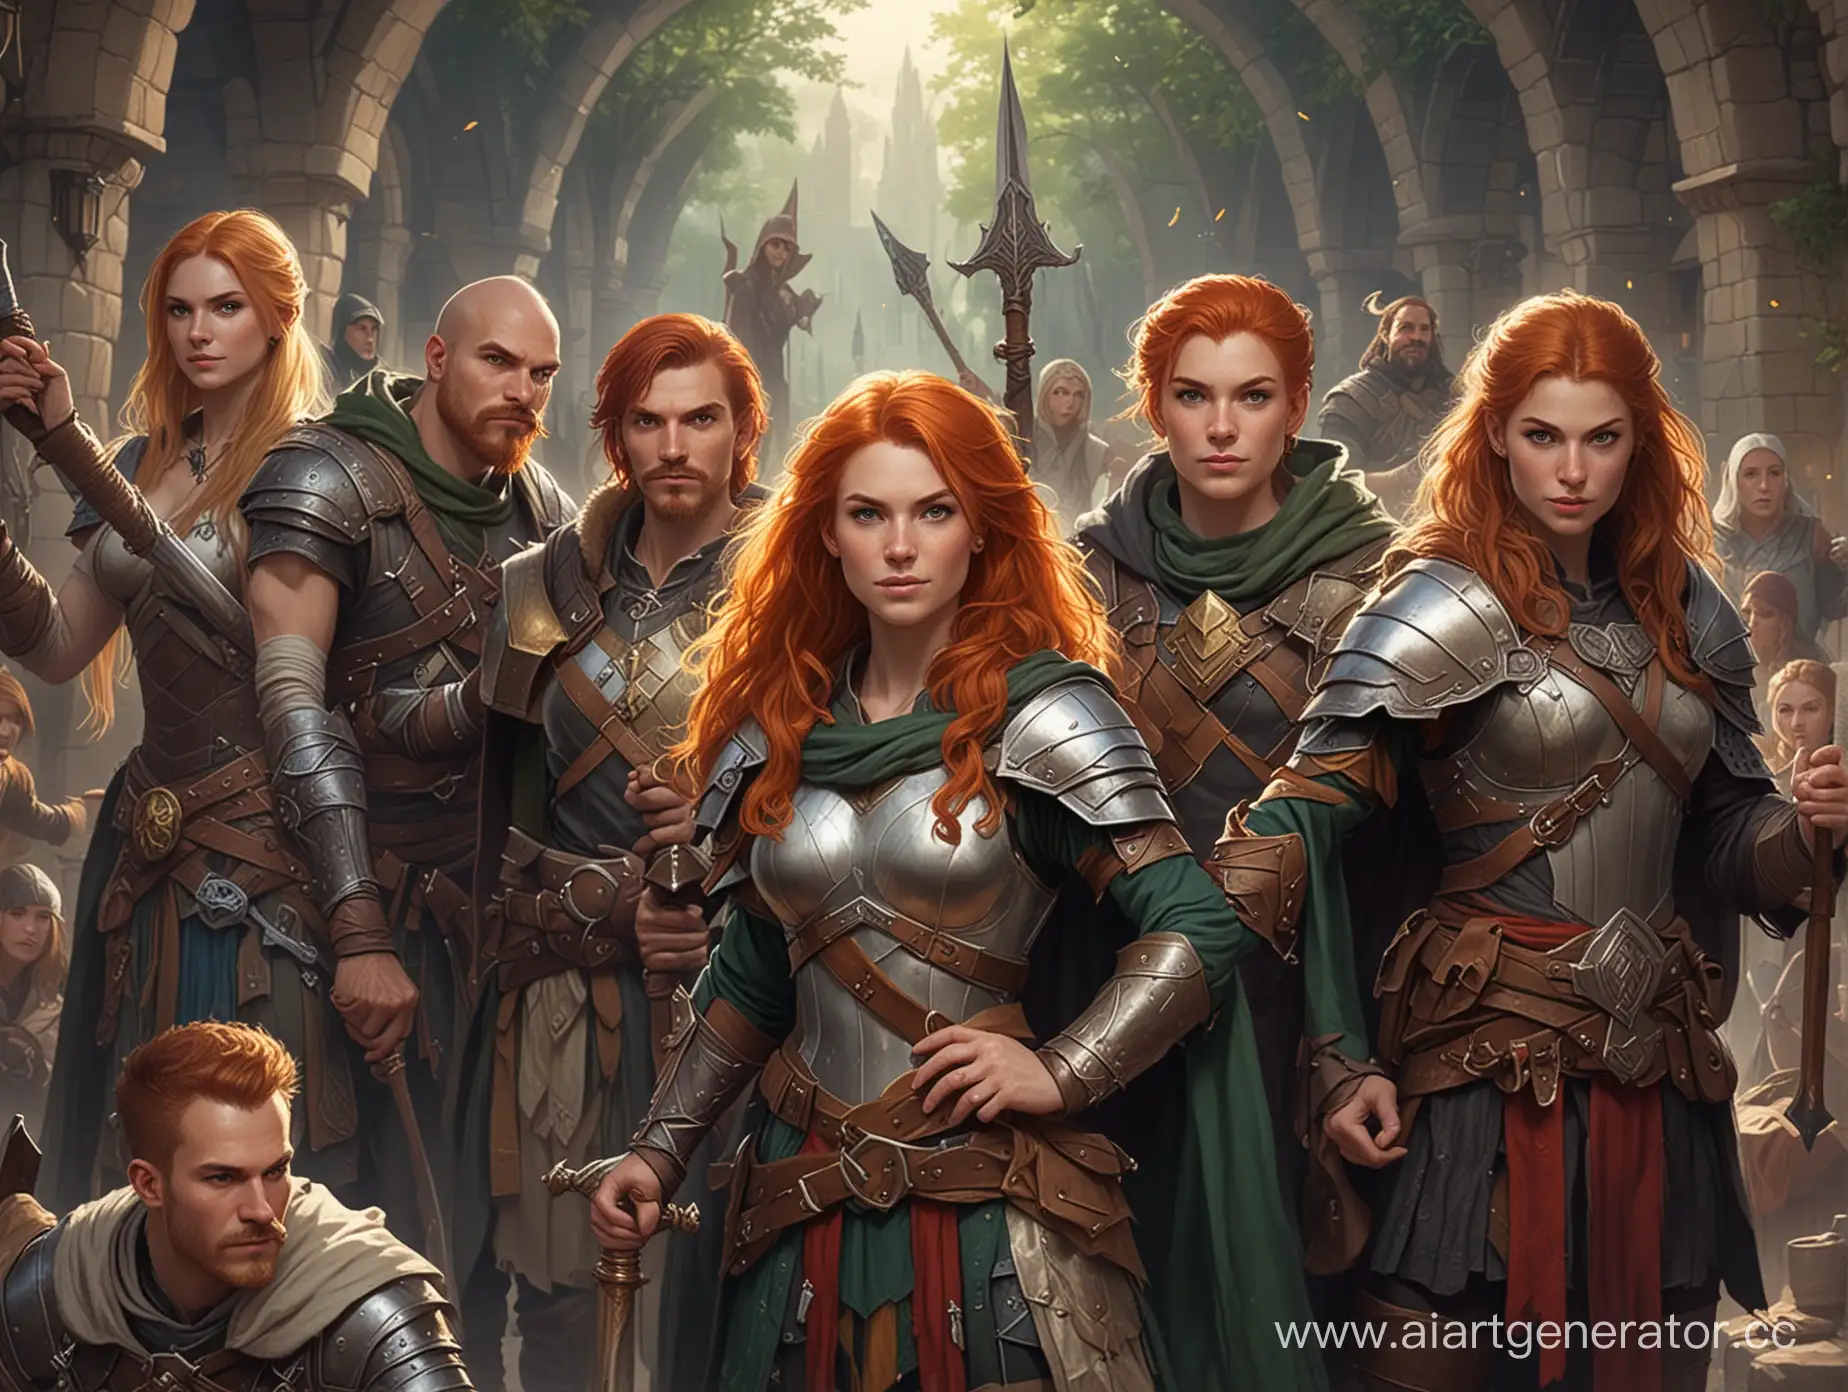 Draw an image of a dungeons and dragons' Party including a female redhead dwarf, a young blonde human cleric, a tall and strong female wizard with cloak, a human Greek warrior bald with a mustache, and a human ranger similar to Robin hood.
